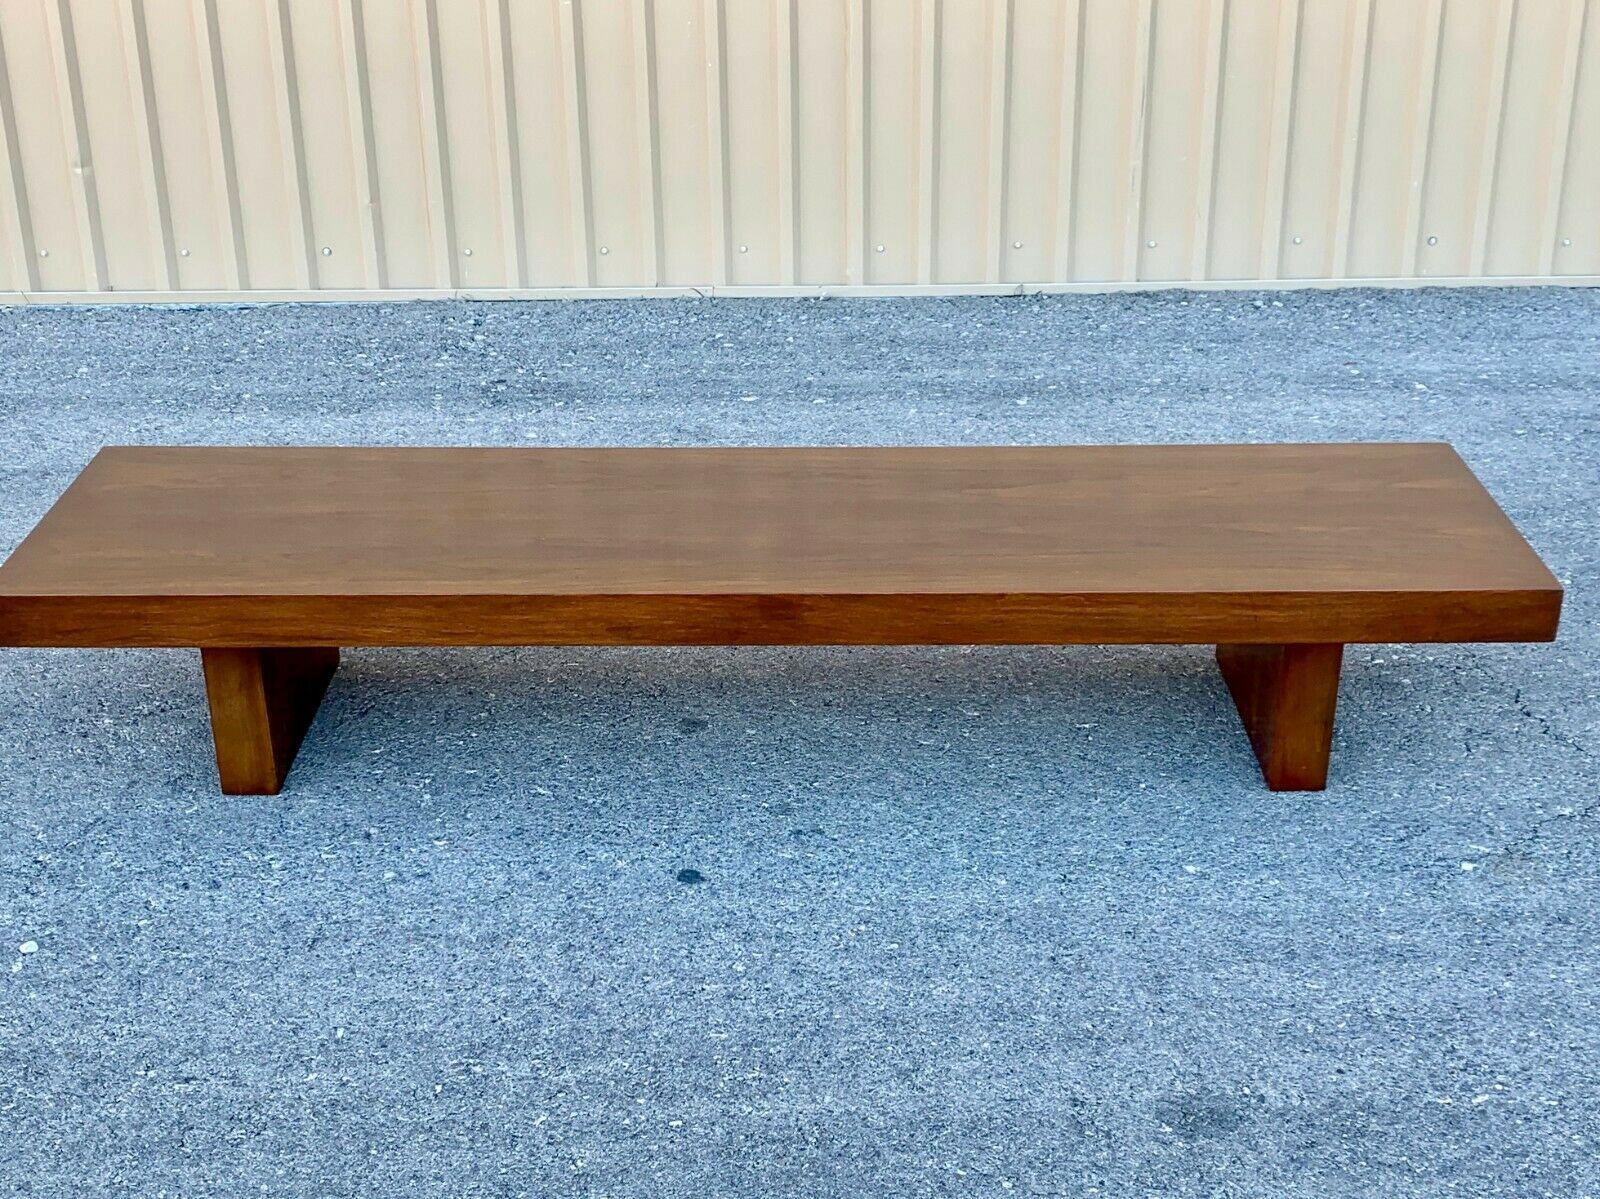 American 1950's Show-Pieces Mid-Century Modern Asian Low Coffee or Teahouse Table Bench